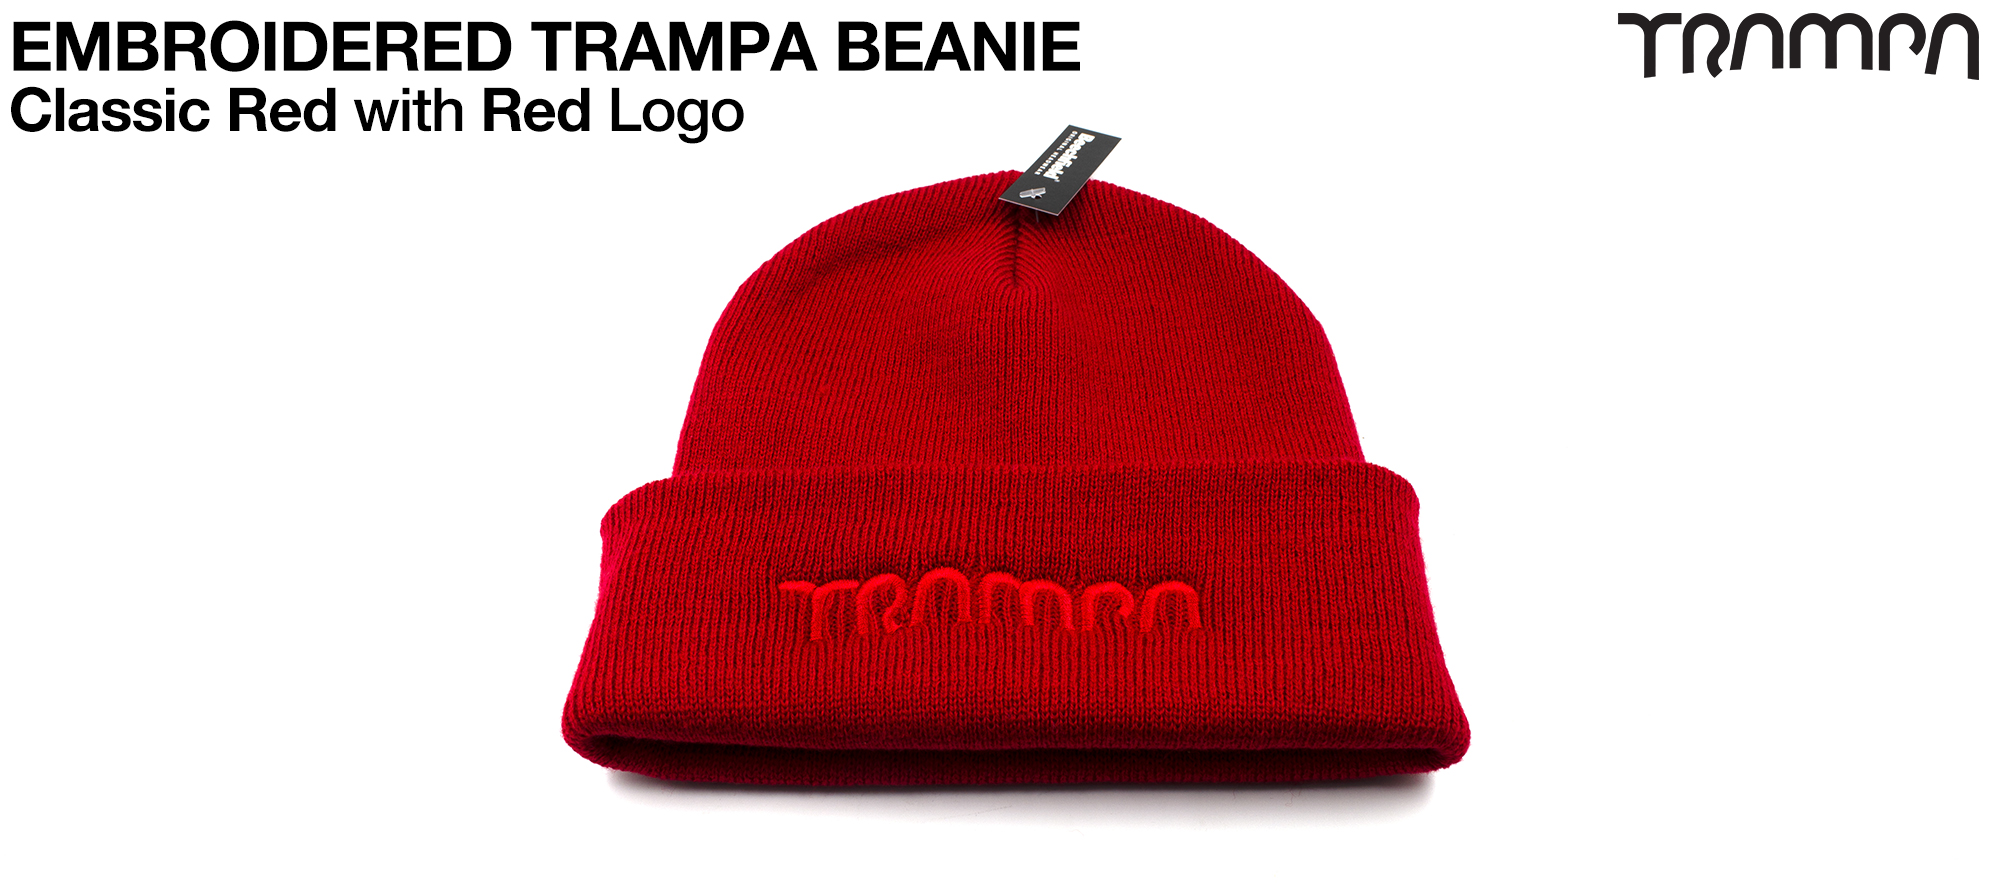 Classic RED Woolly hat with Electric RED embroidered TRAMPA logo - Double thick turn over for extra warmth